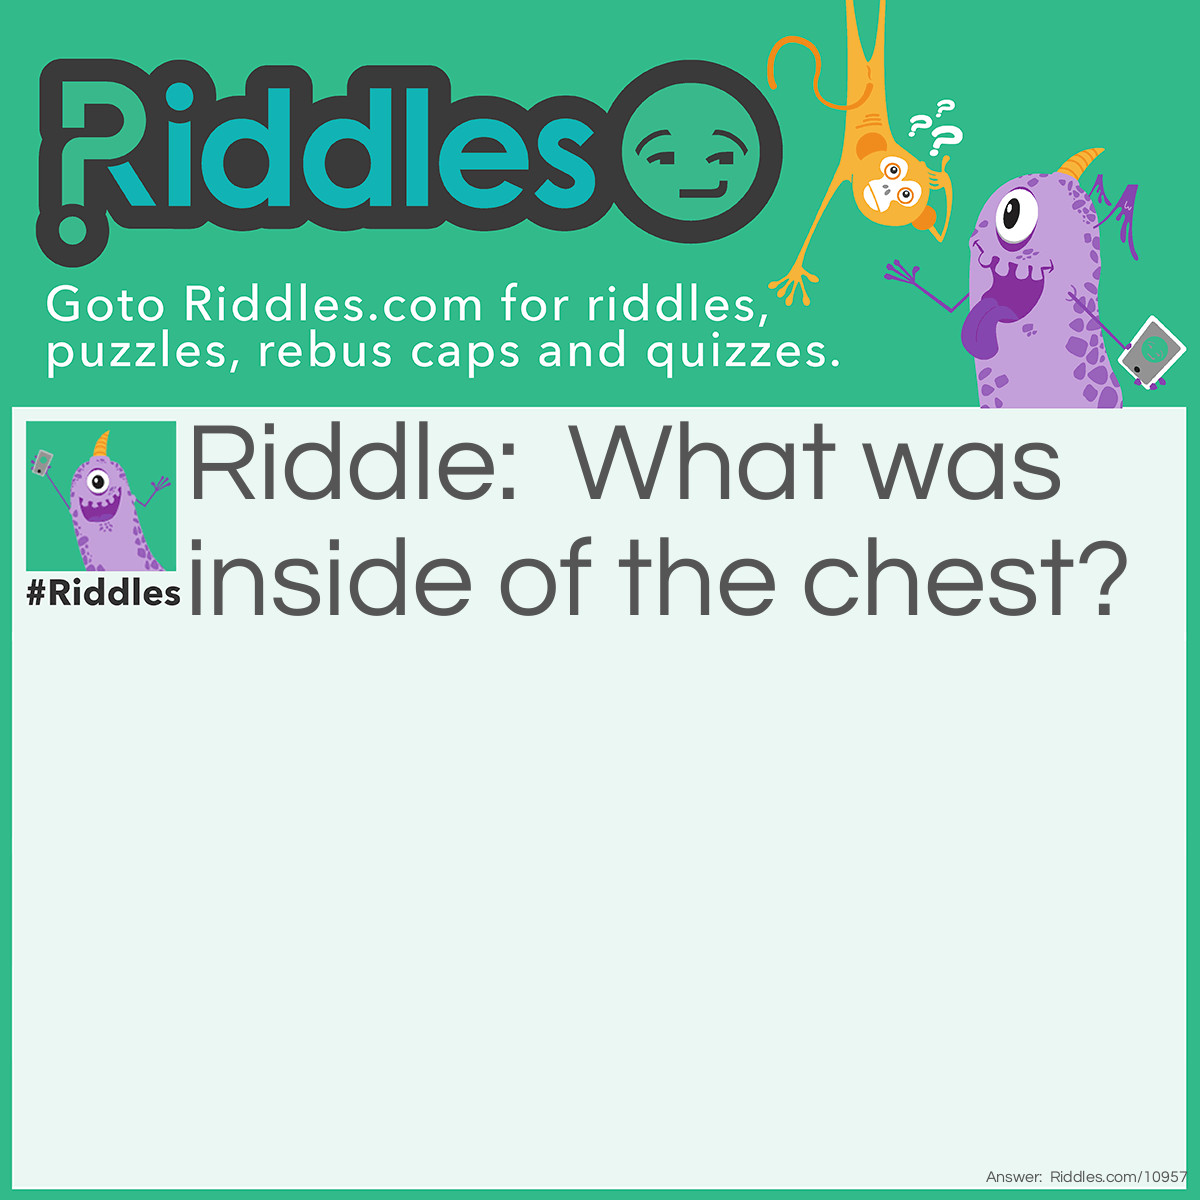 Riddle: What was inside of the chest? Answer: Gold.